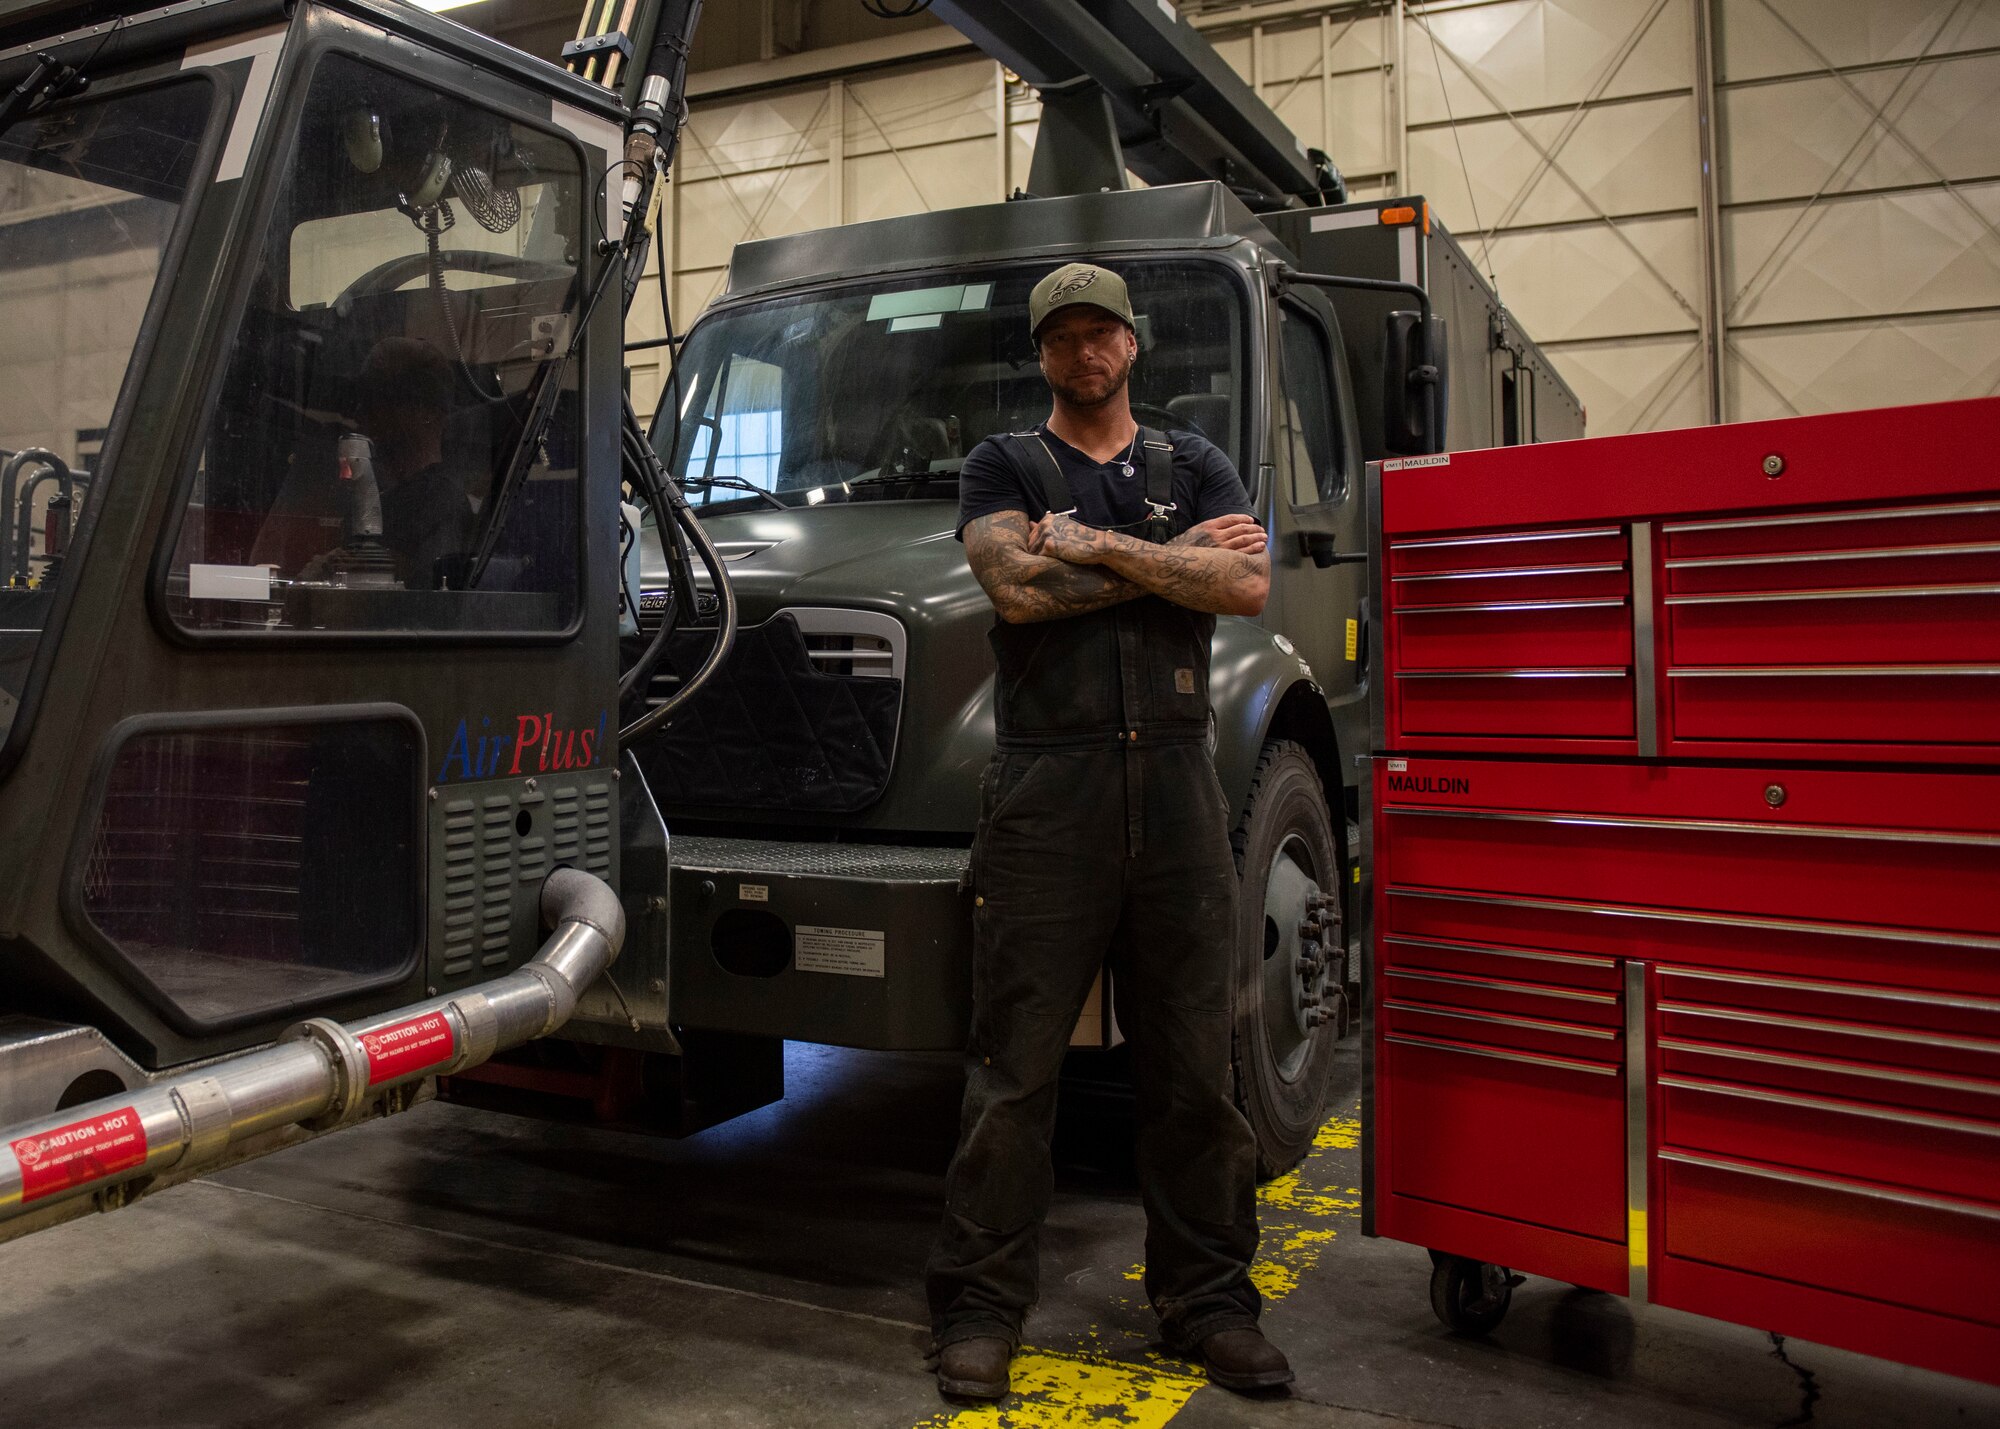 Jessie Mauldin, 673d Logistics Readiness Squadron heavy mobile equipment mechanic, poses for a photo next to a newly modified deicing truck at Joint Base Elmendorf-Richardson, Alaska, Jan. 22, 2019. The modification involves strategically attaching four eyelets to the top of each truck so mechanics can attach a mobile safety harness. Mauldin has taken steps to push his innovation to all heavy mobile equipment maintenance shops Air Force-wide.